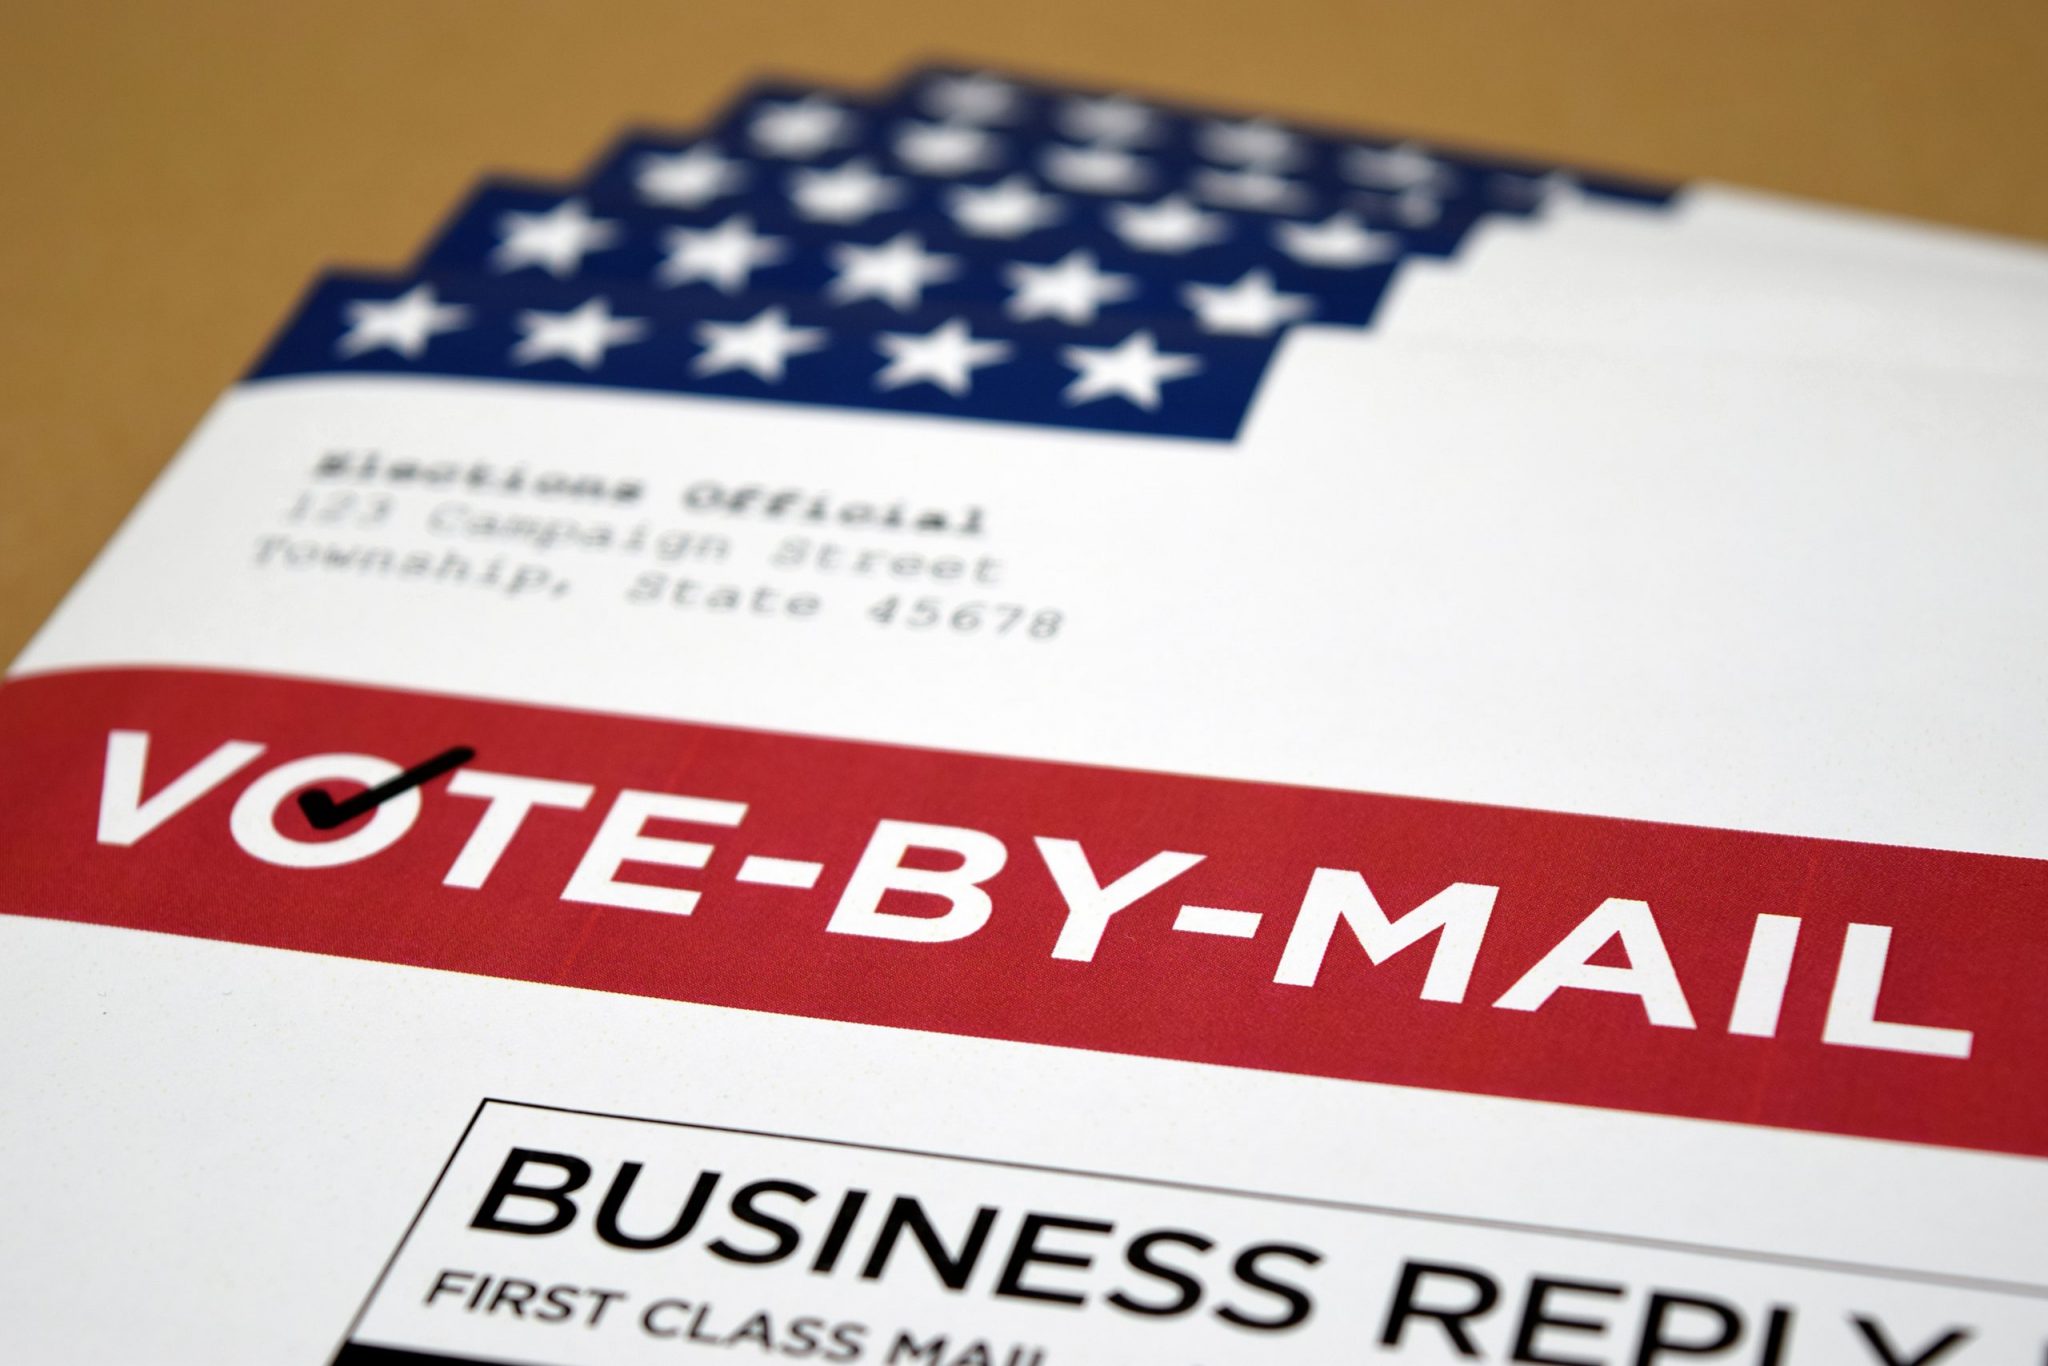 Mockup (fake / print-out concept) for election theme of Vote by Mail Ballot envelopes for election